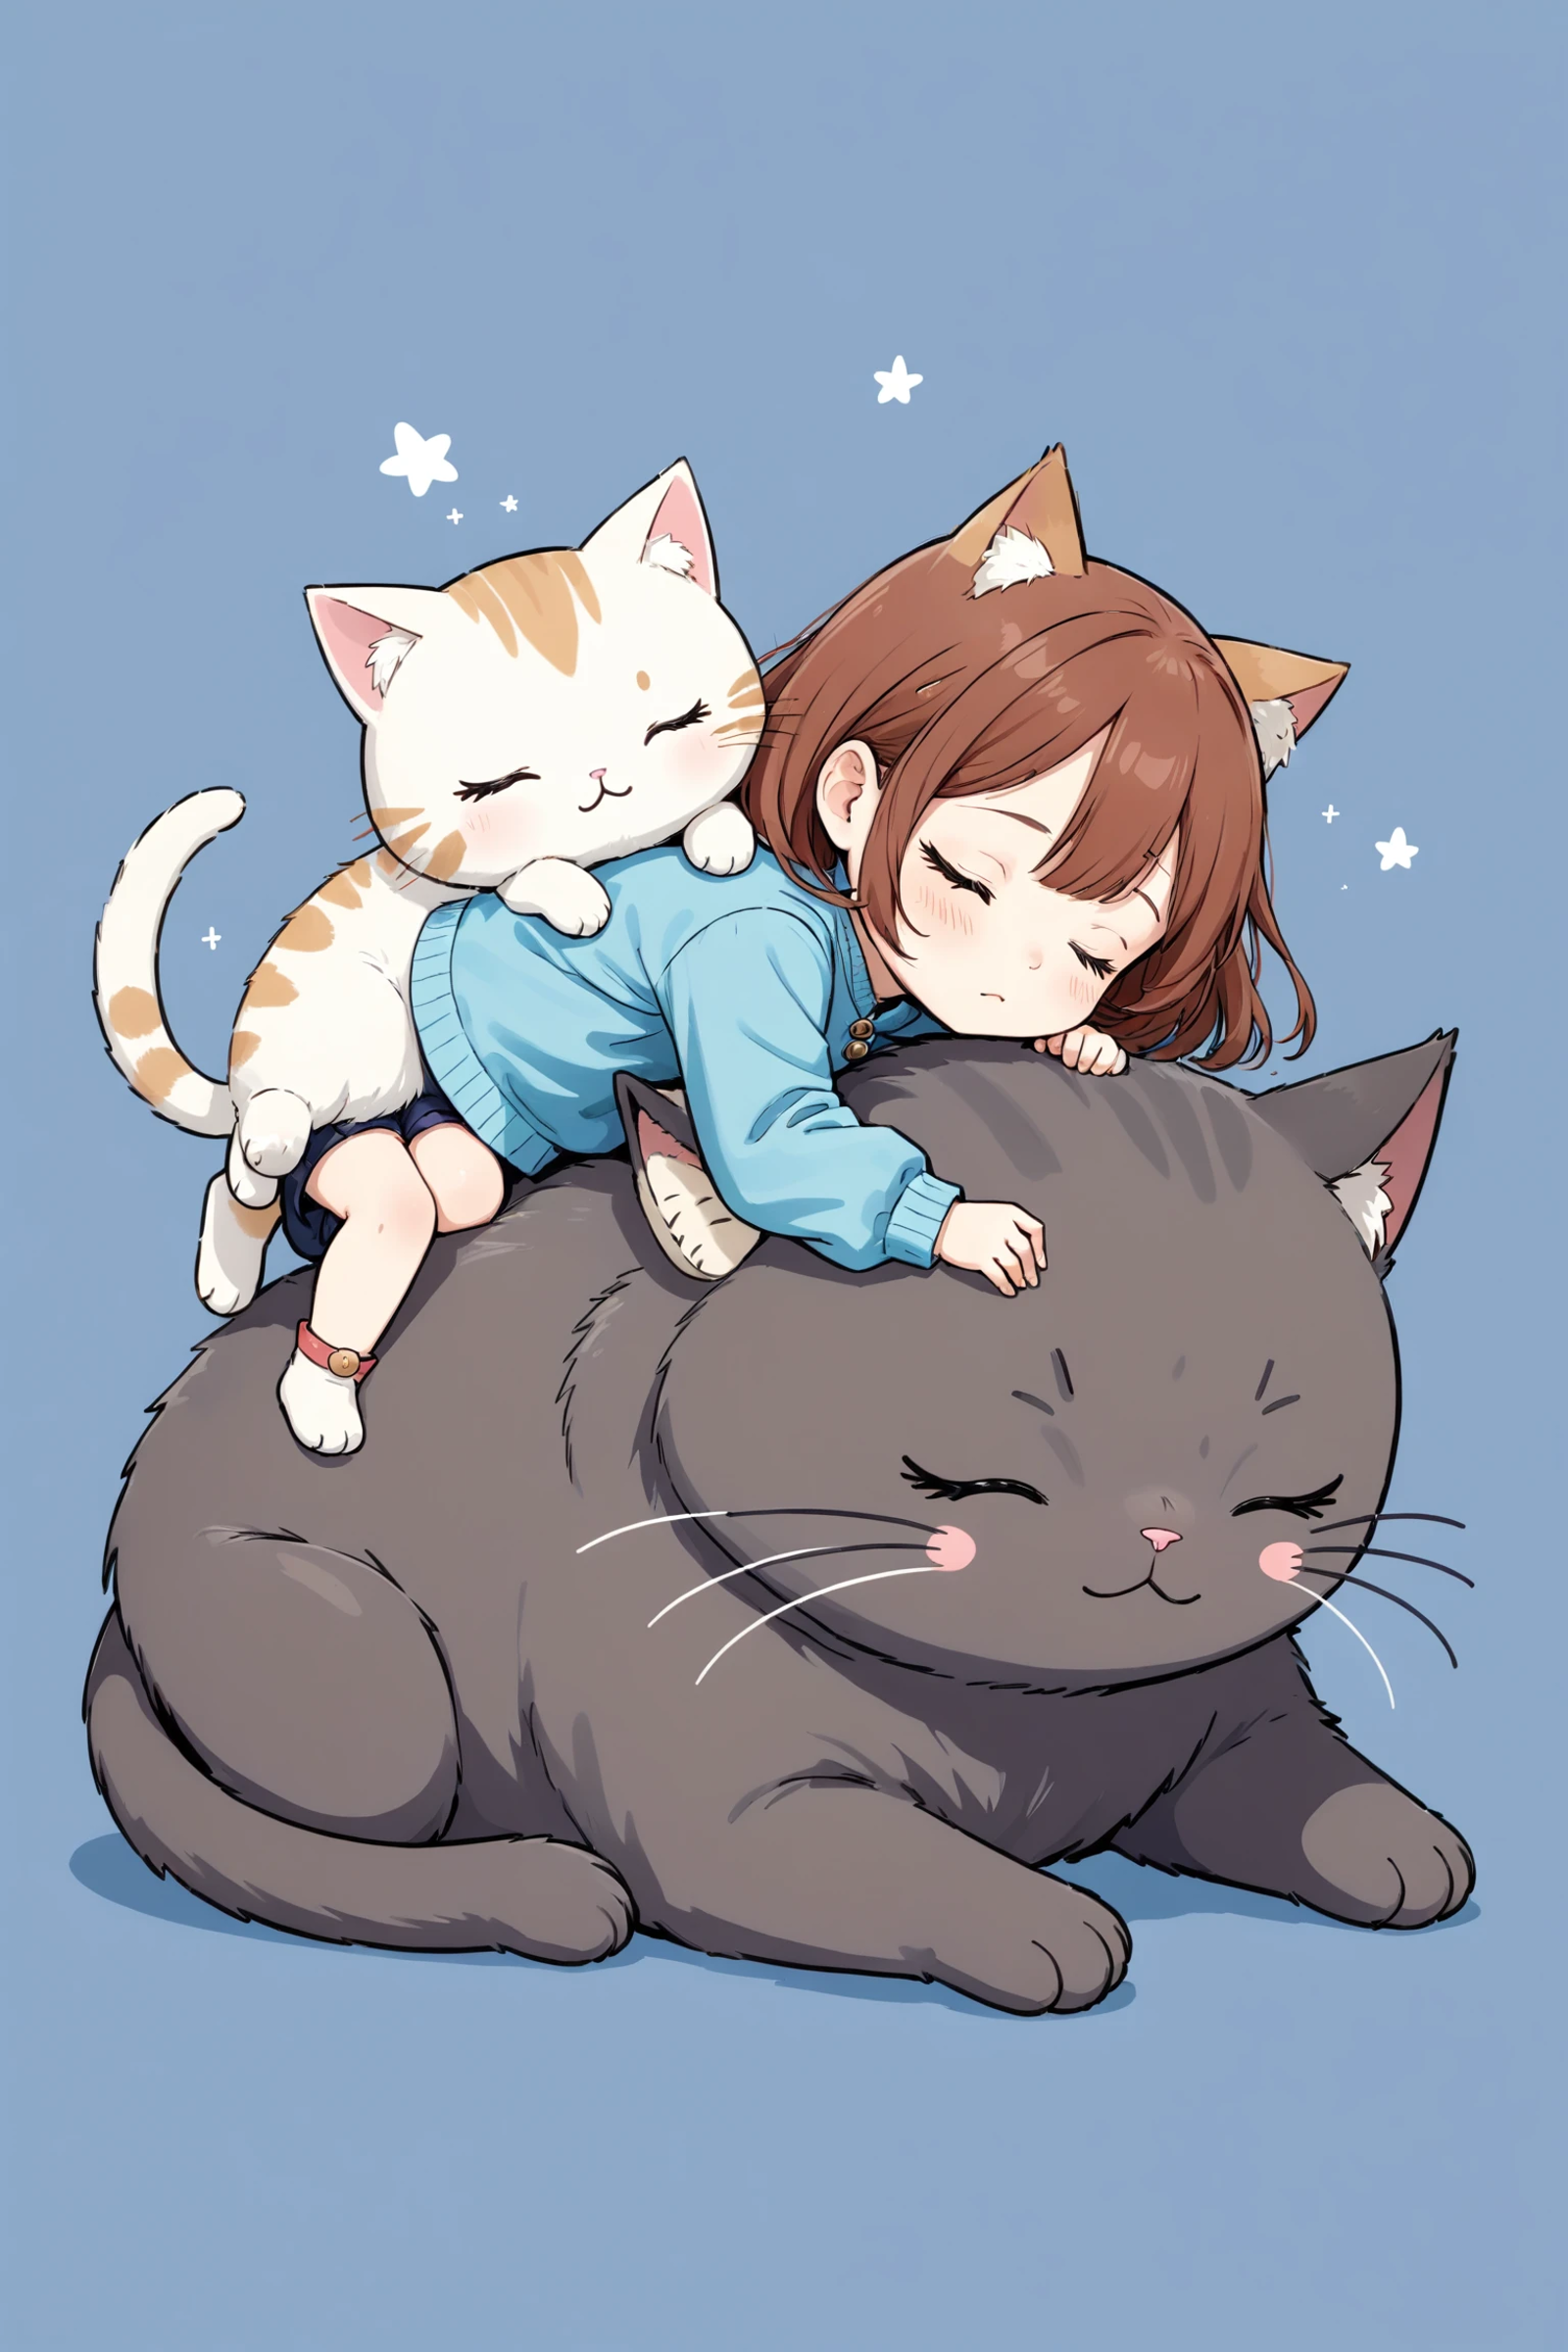 A cute image of a little girl asleep on top of a cat.